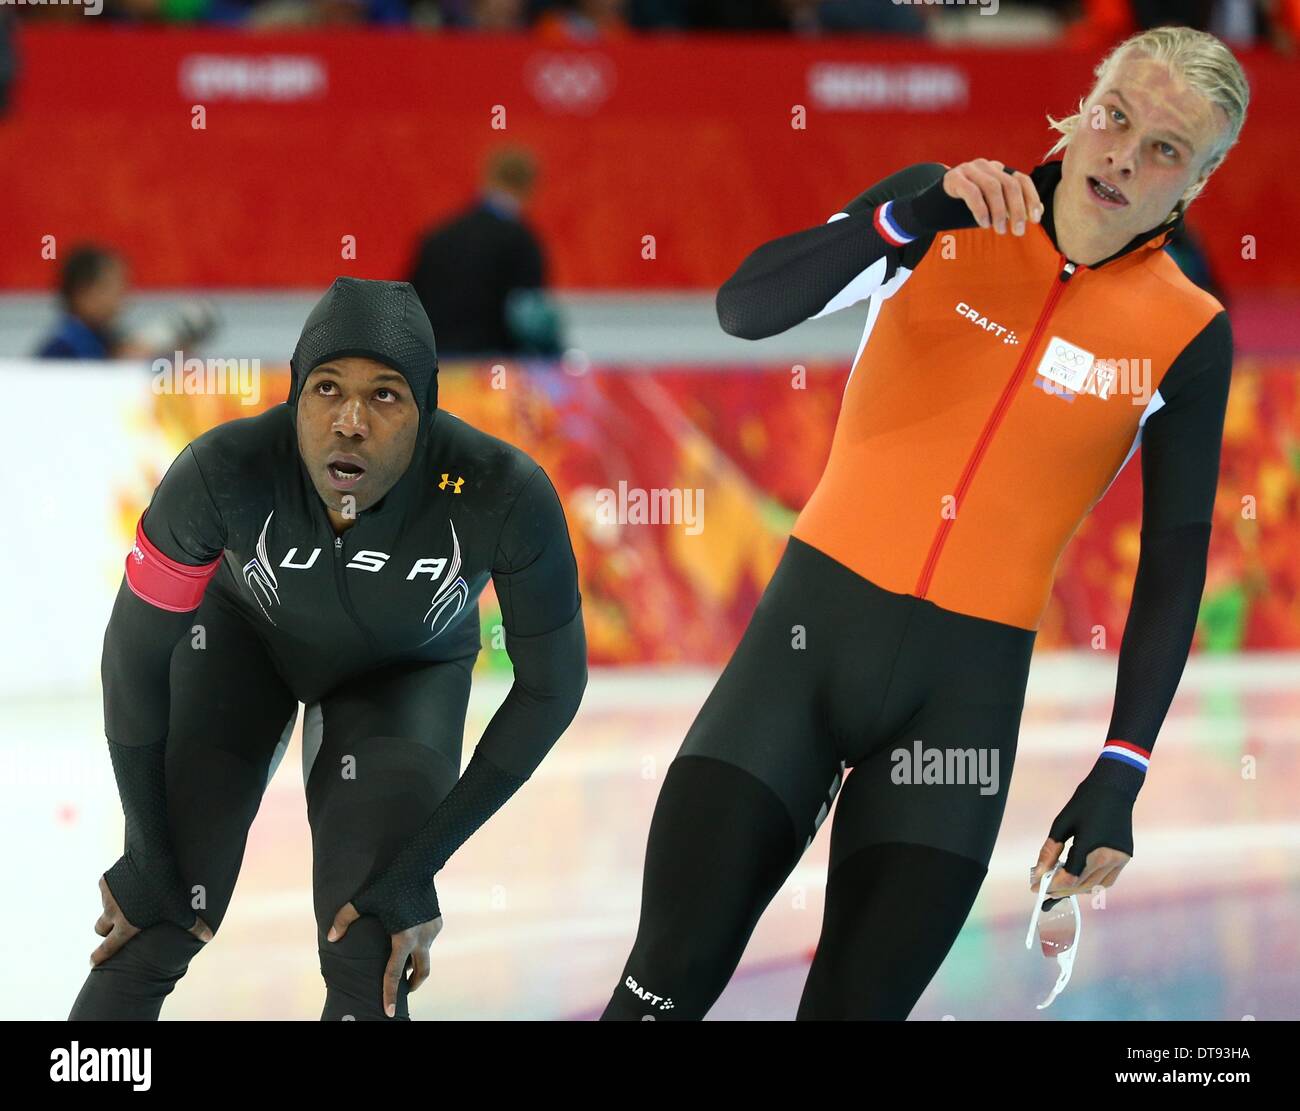 Sochi, Russia. 12th Feb, 2014. Shani Davis of USA and Koen Verweij (R) of  the Netherlands react during the Men's 1000m Speed Skating event in the  Adler Arena at the Sochi 2014